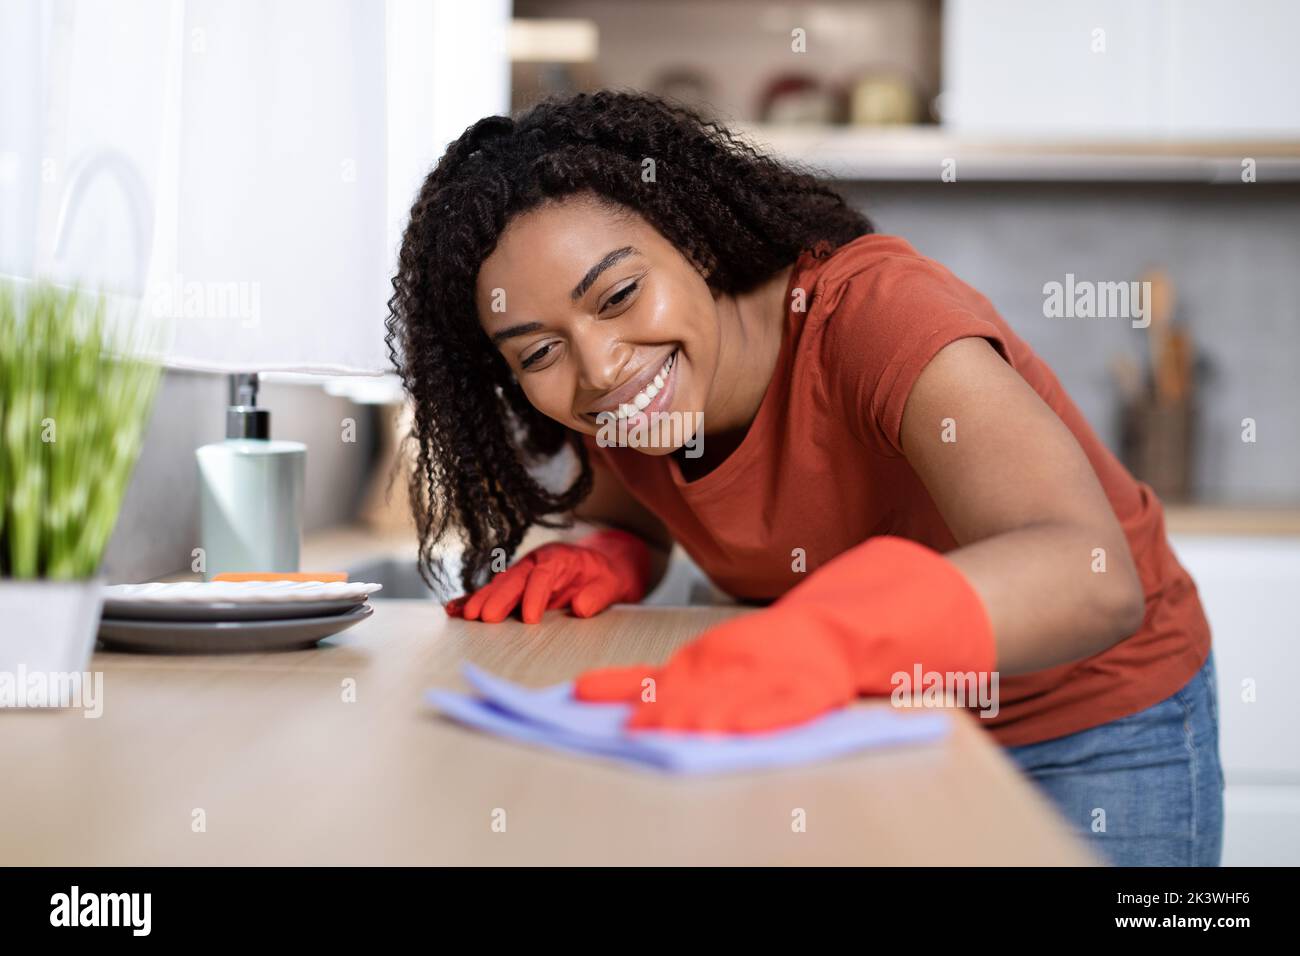 Smiling pretty millennial african american woman in rubber gloves dusting table with dishes Stock Photo